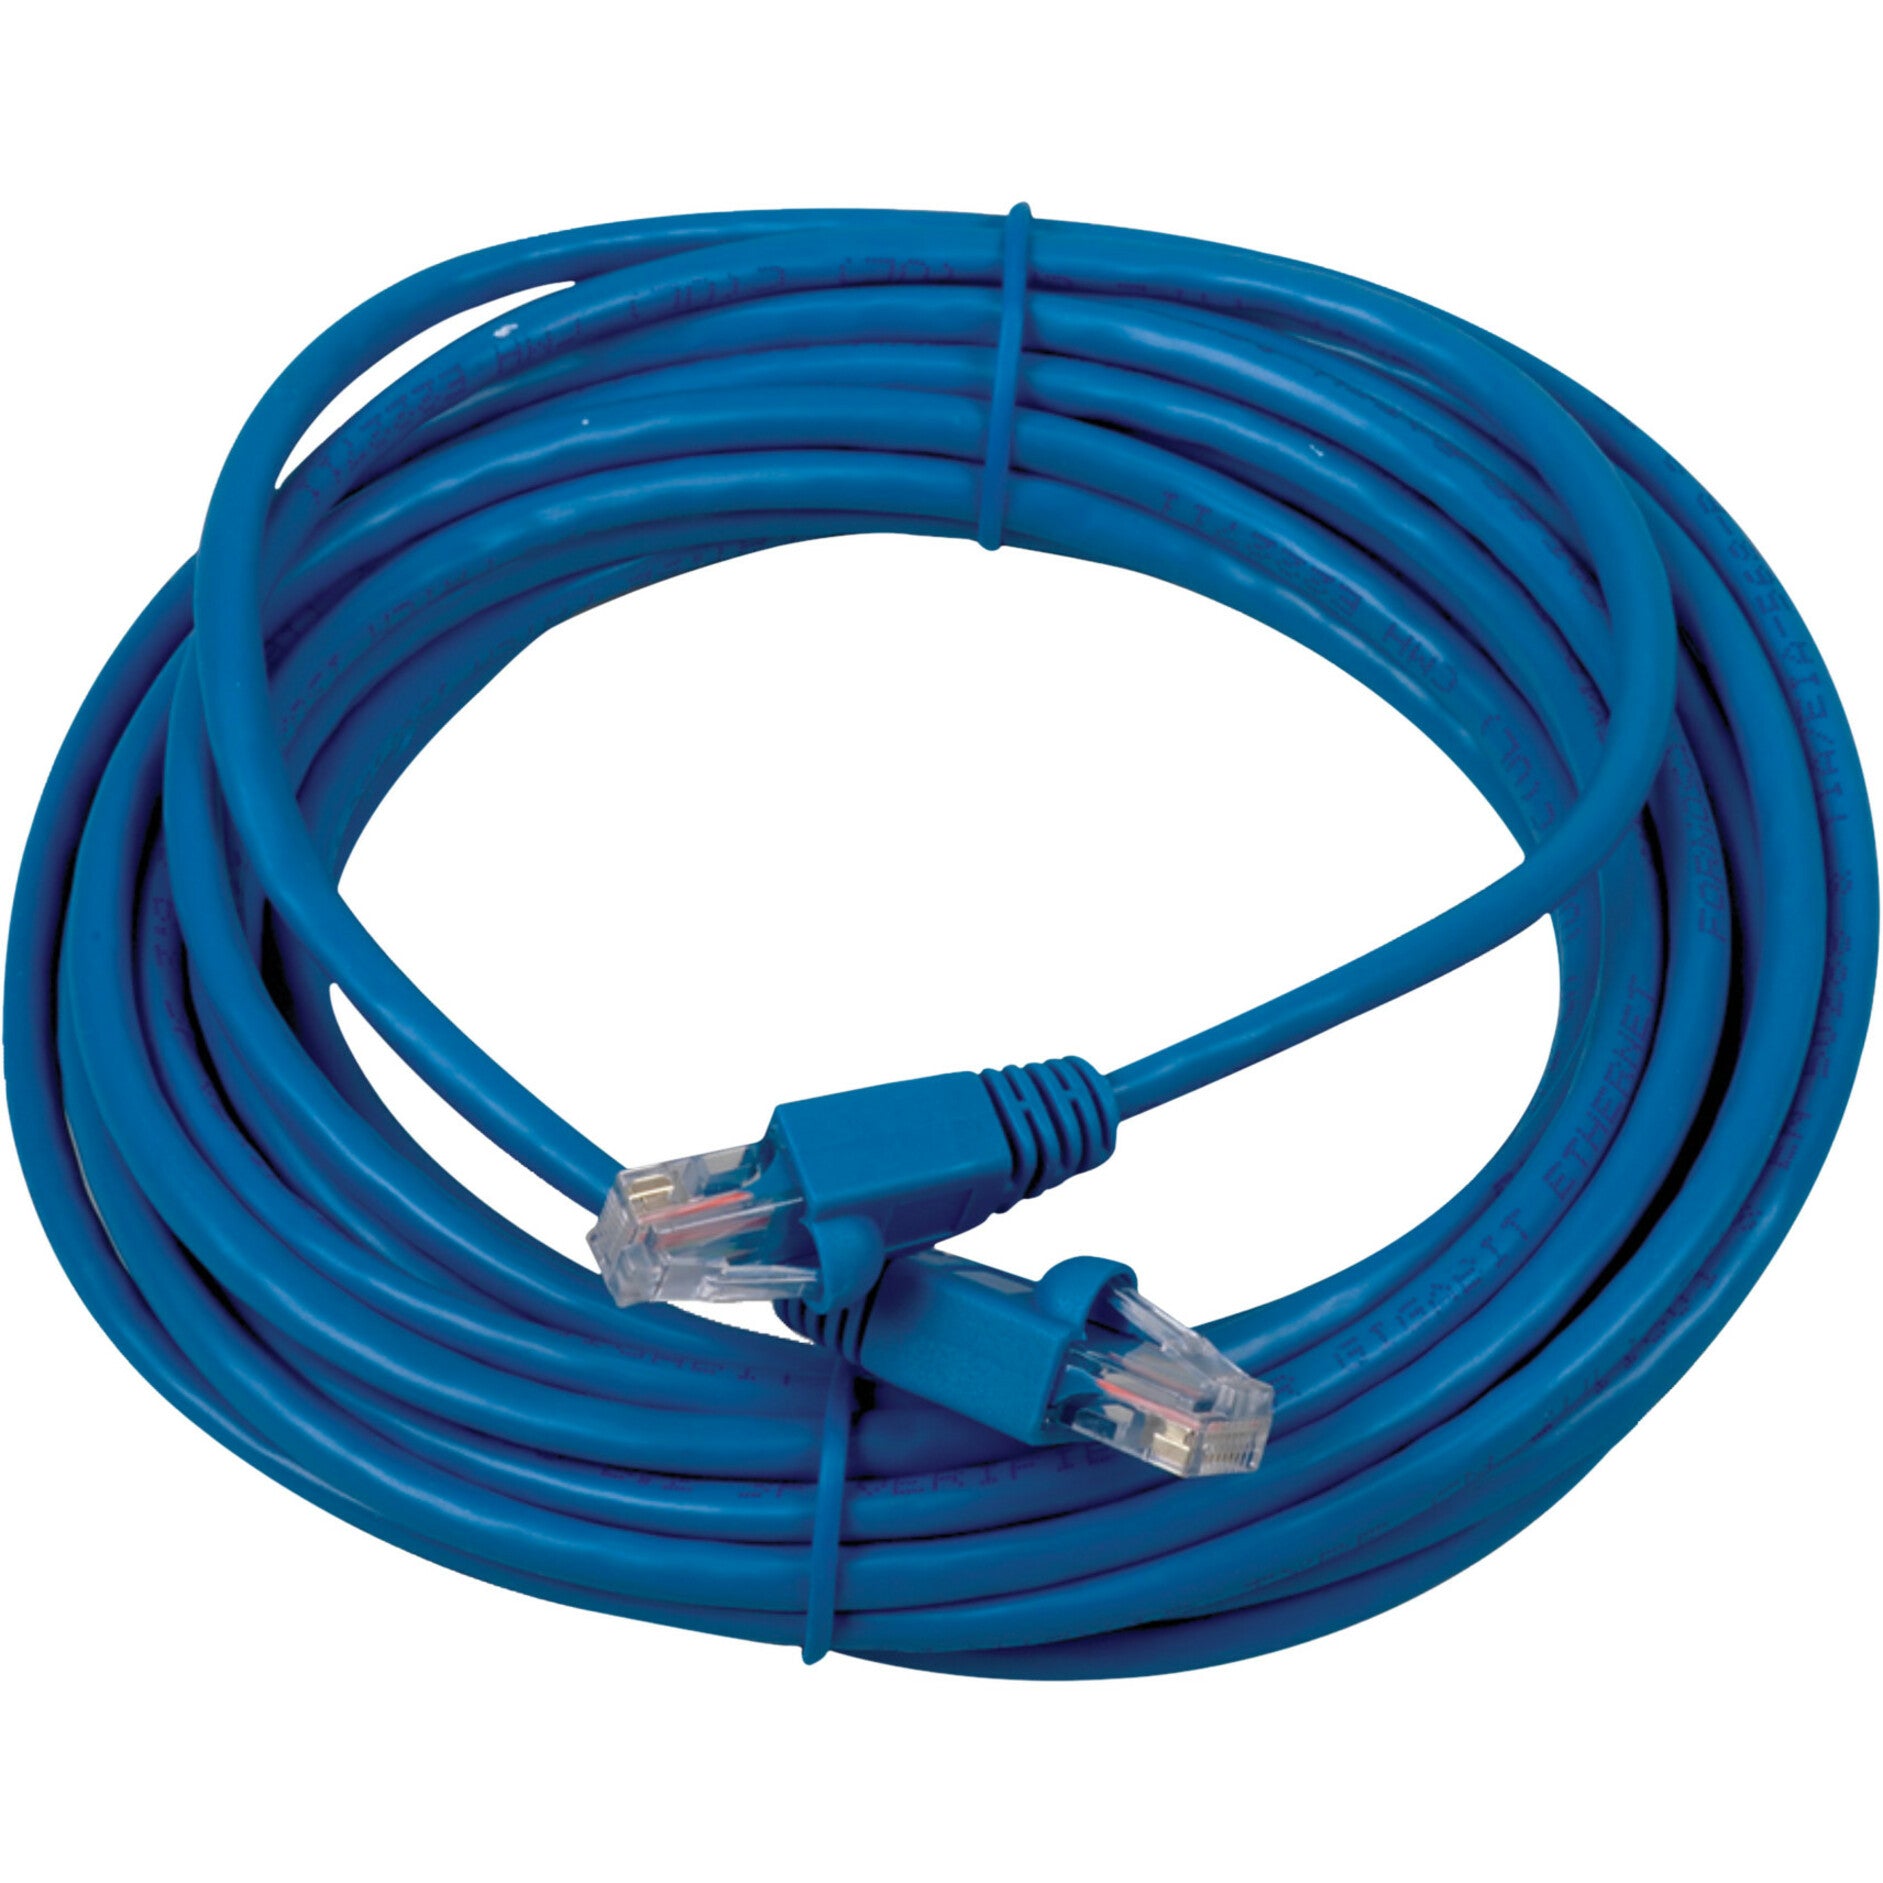 RCA TPH532BR Cat5e 25 Ft Network Cable - Blue, High-Speed Ethernet Cable for Reliable Network Connections